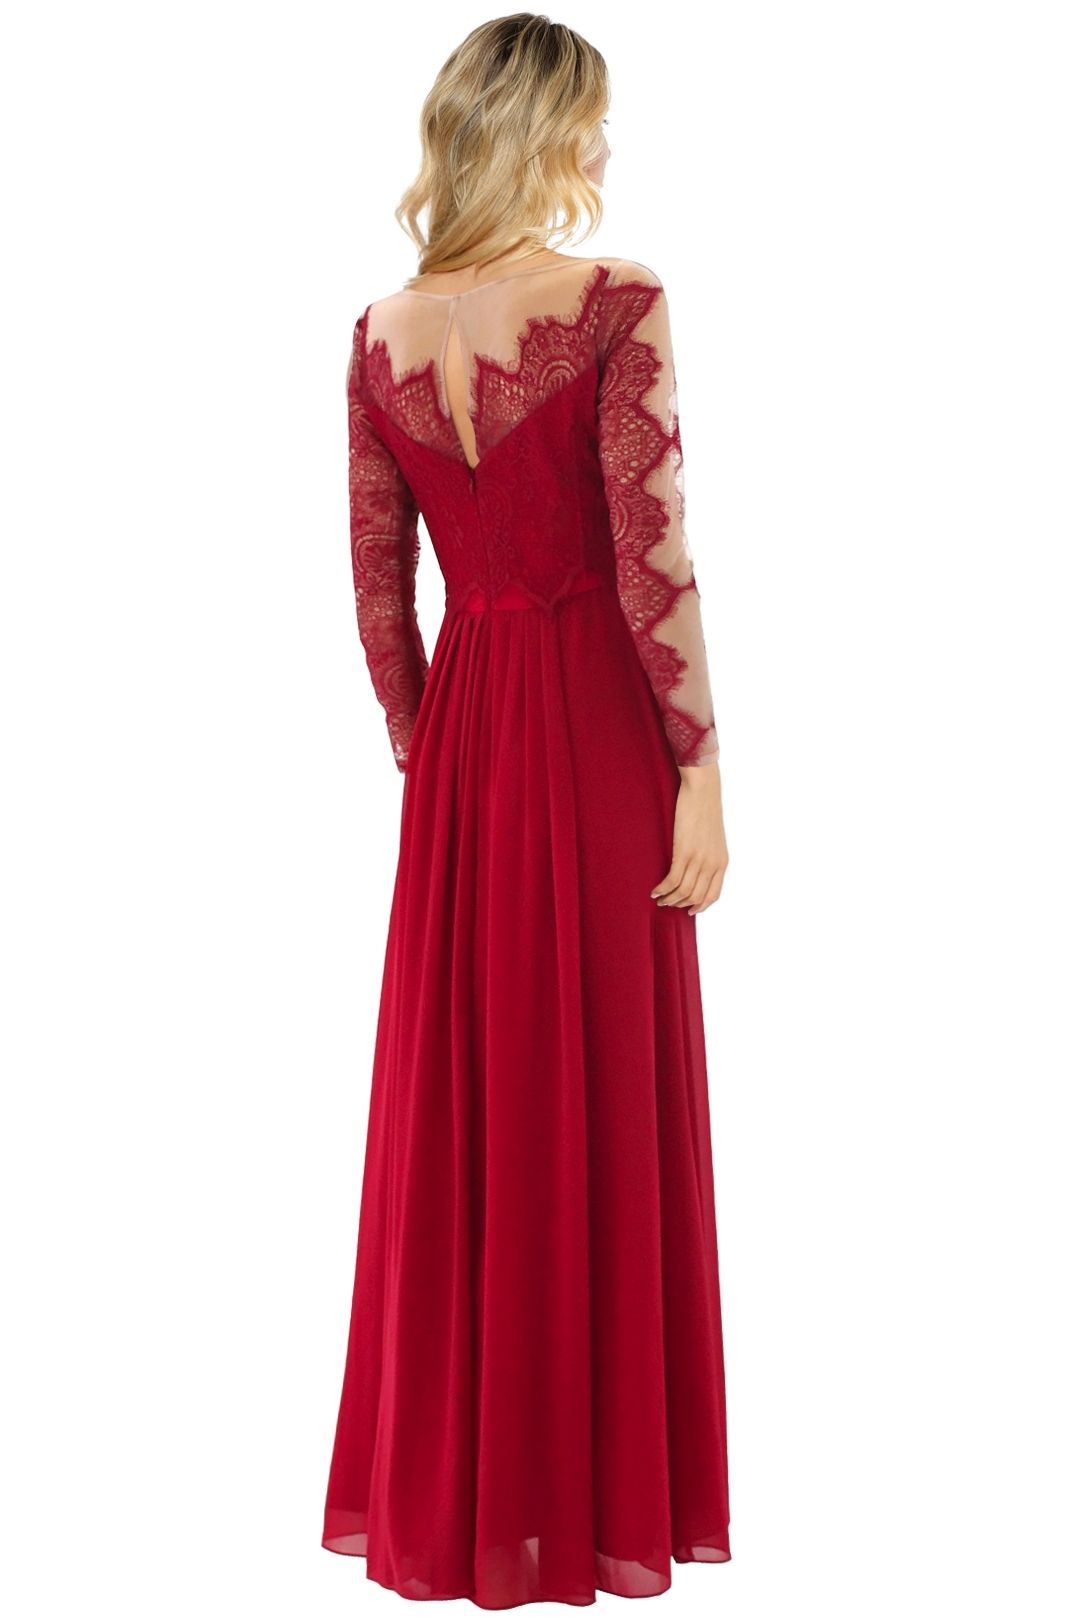 The Dress Shoppe - Gone With The Edge Gown - Red - Back